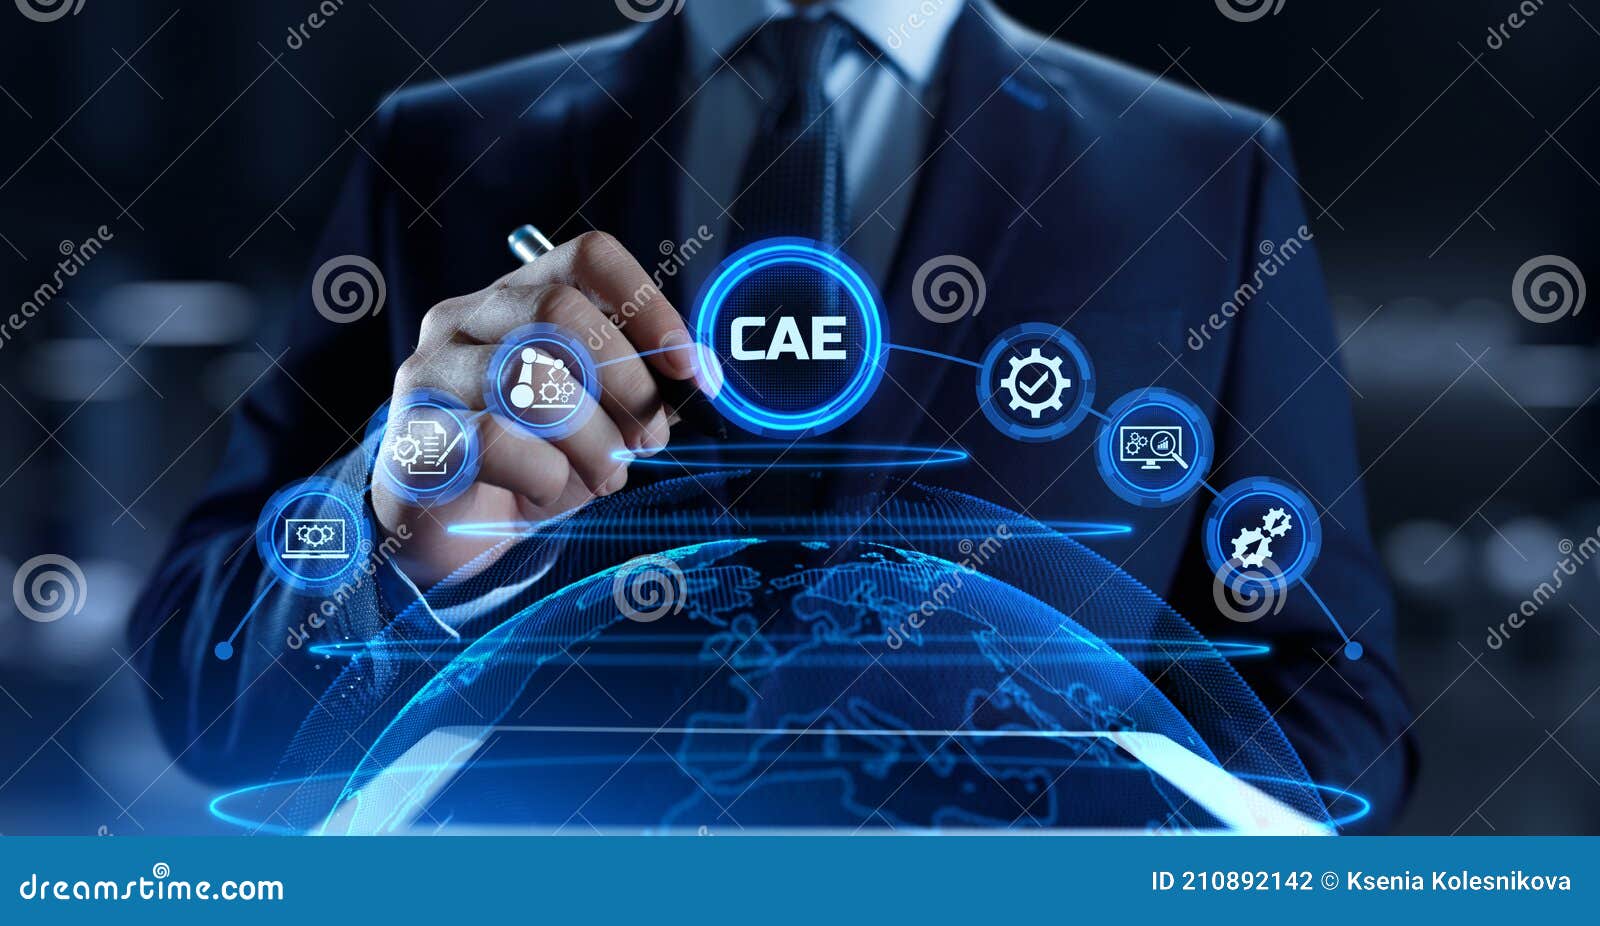 cae computer-aided engineering software system concept. businessman pressing button on screen.